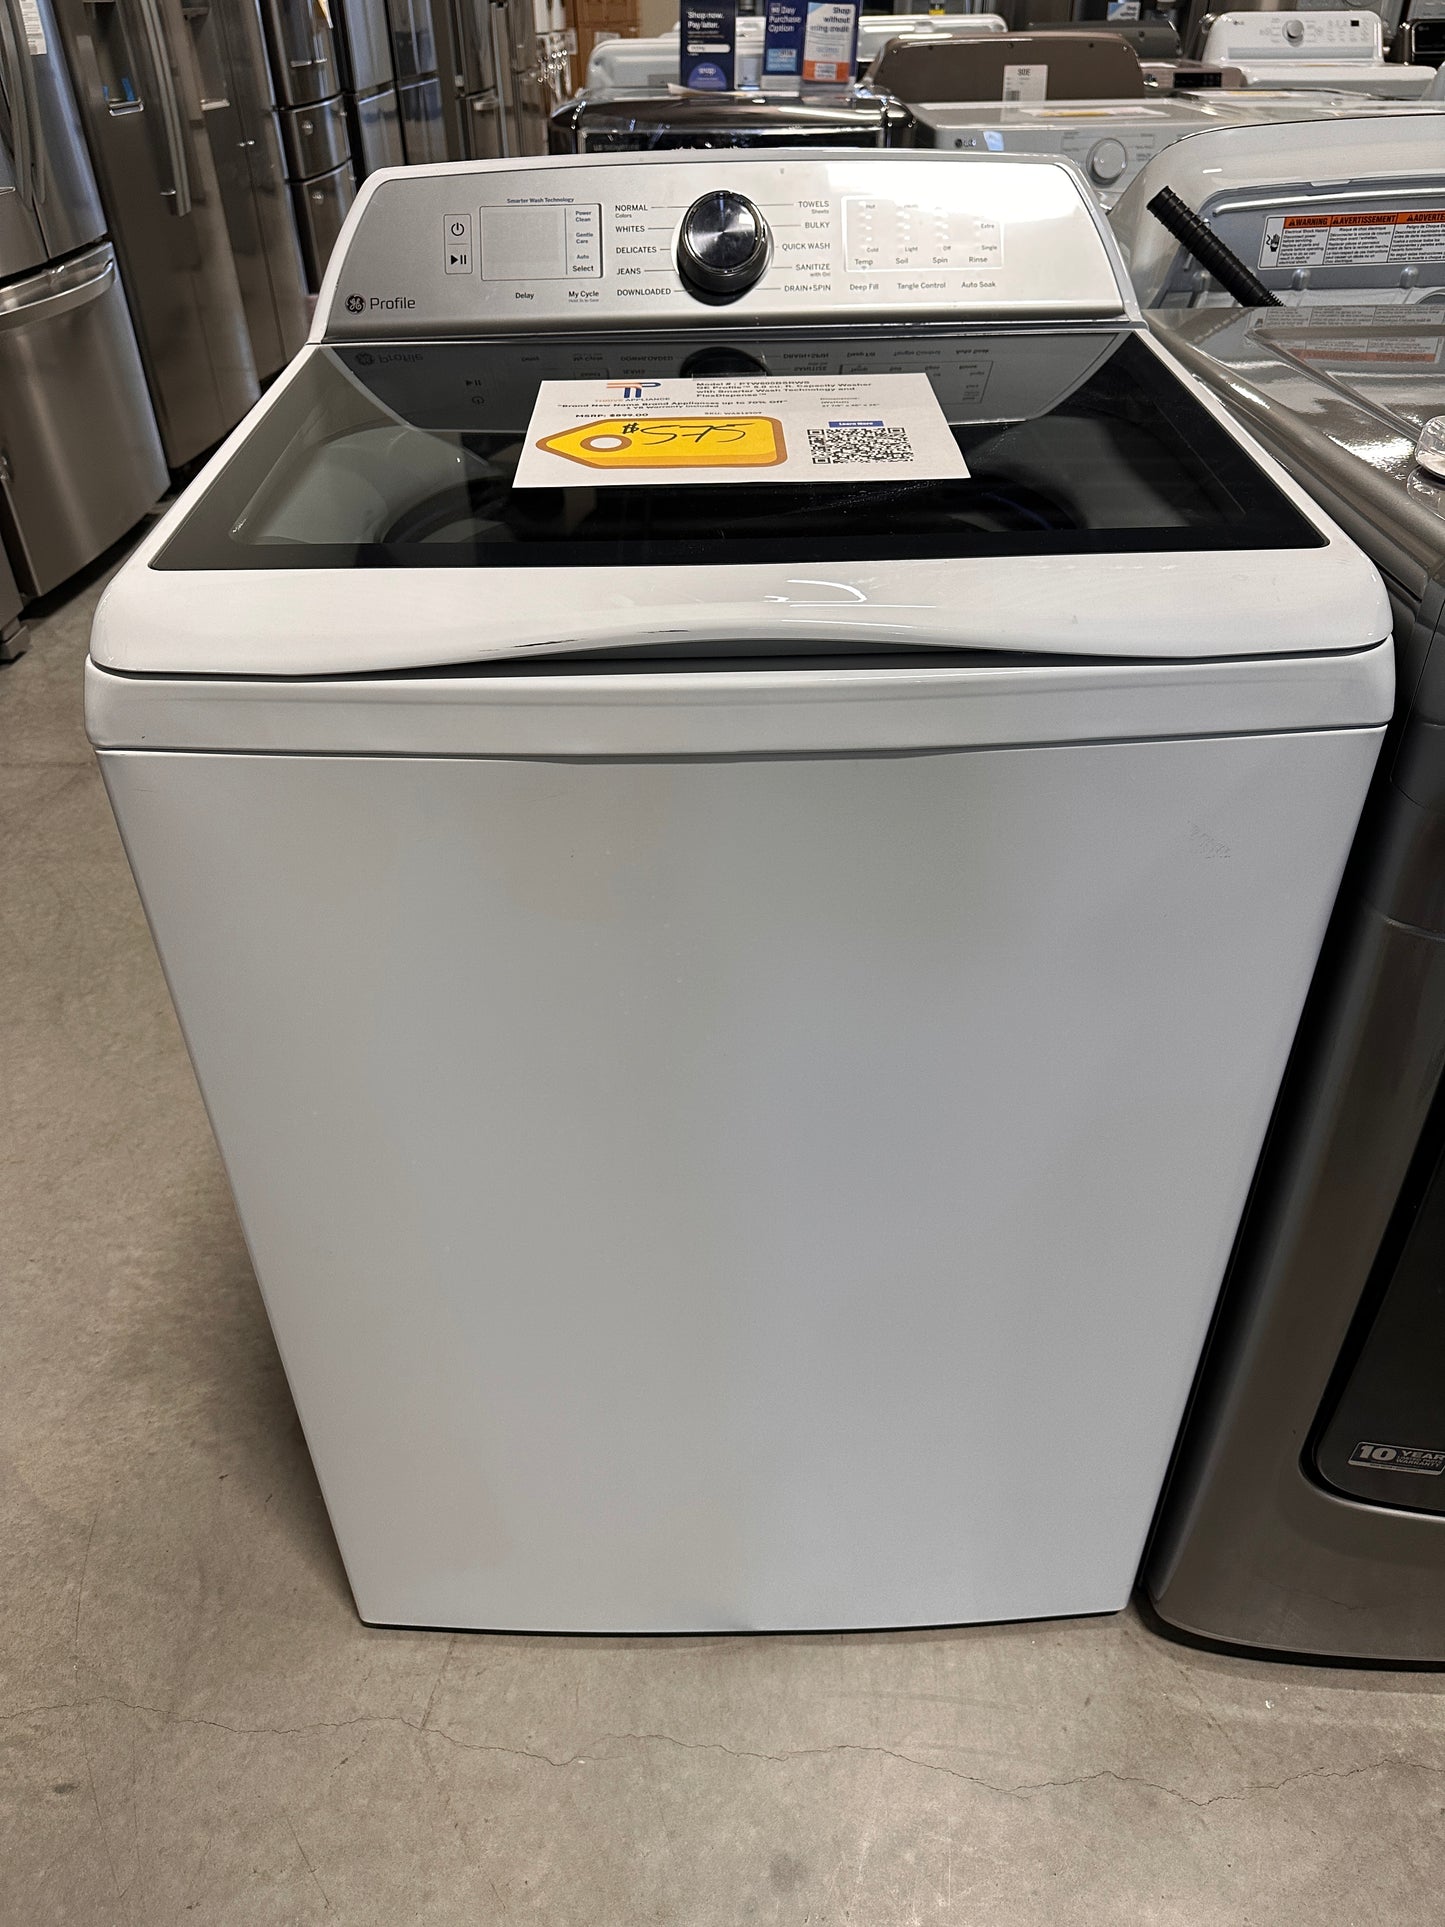 GREAT TOP LOAD GE PROFILE WASHER - WAS12909 PTW600BSRWS